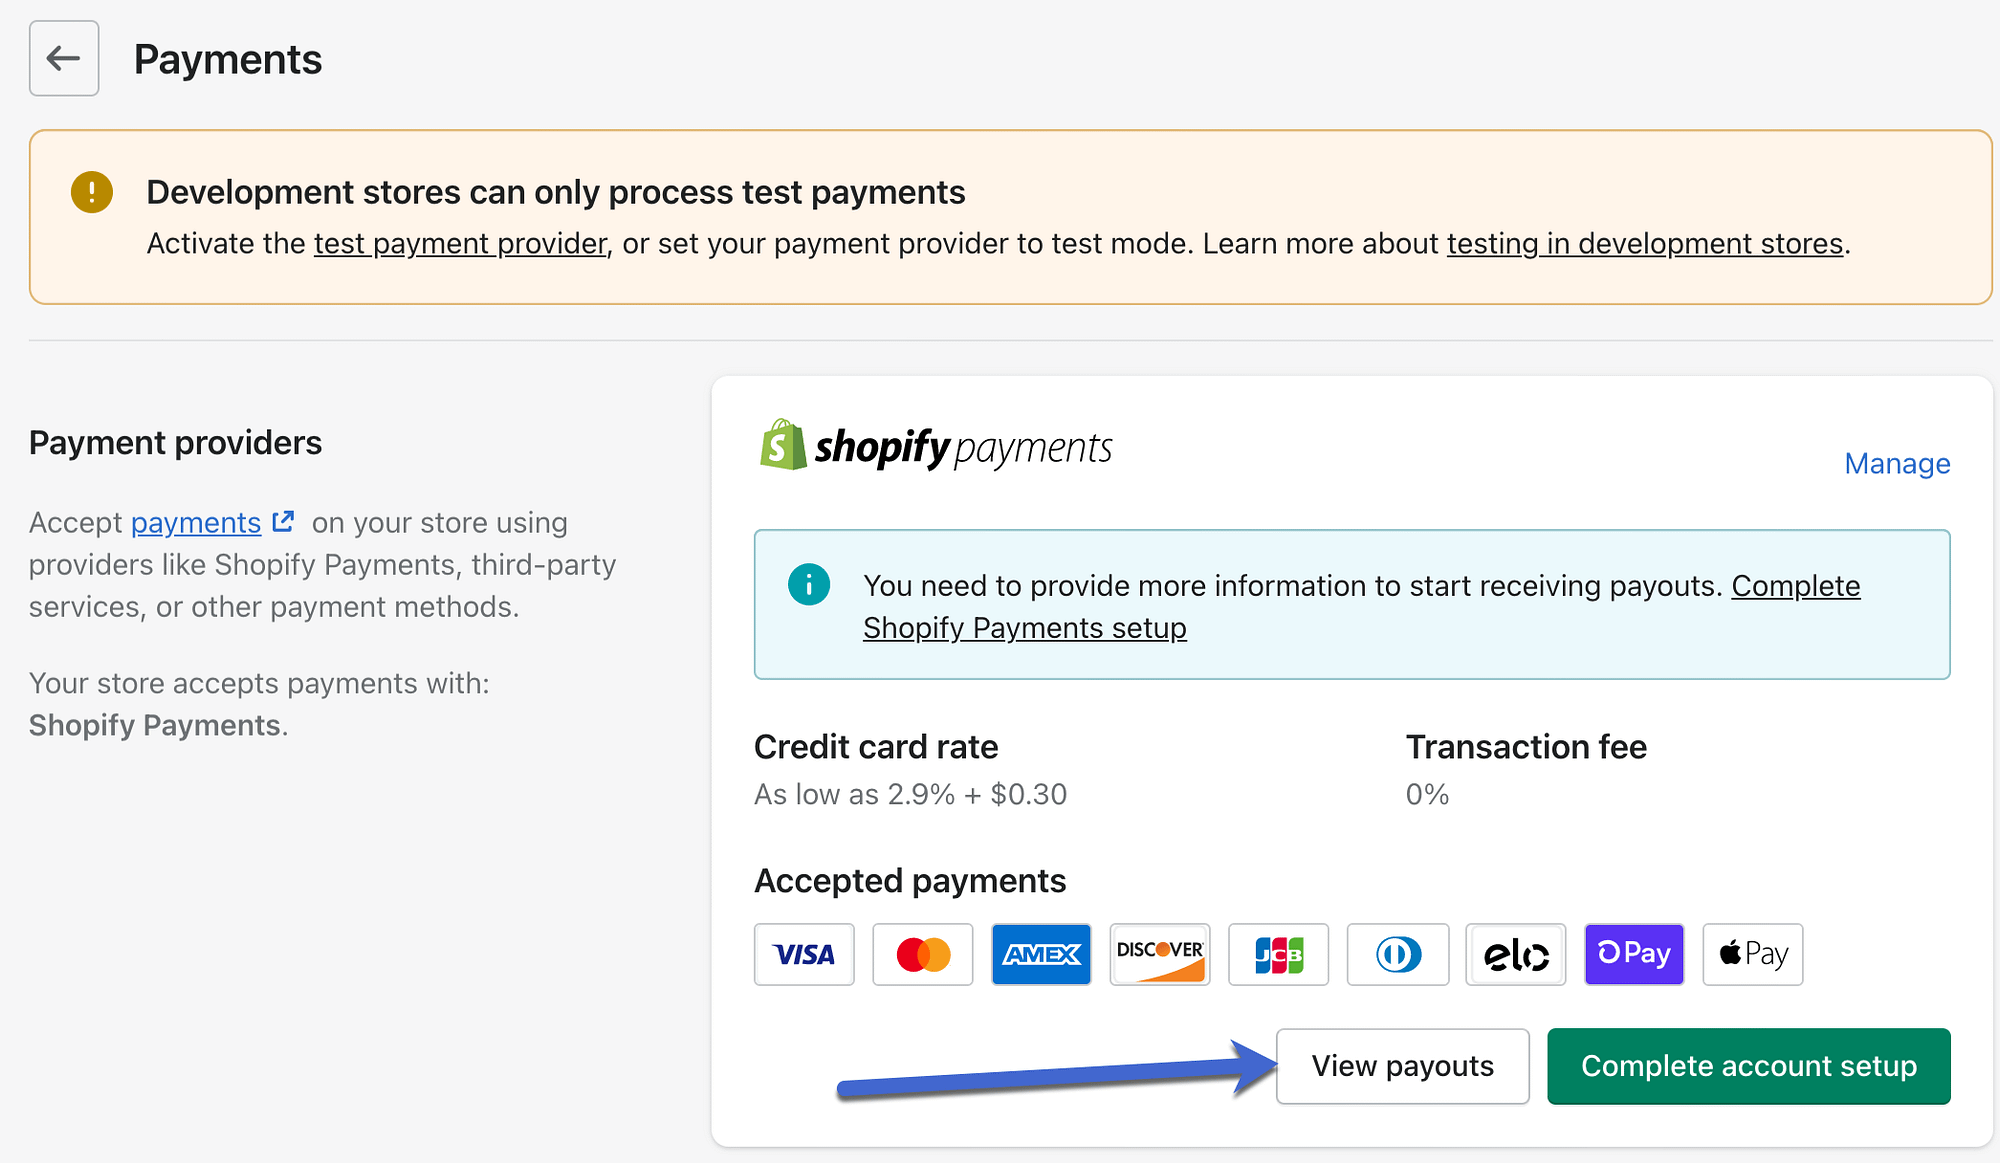 view payouts in Shopify Payments